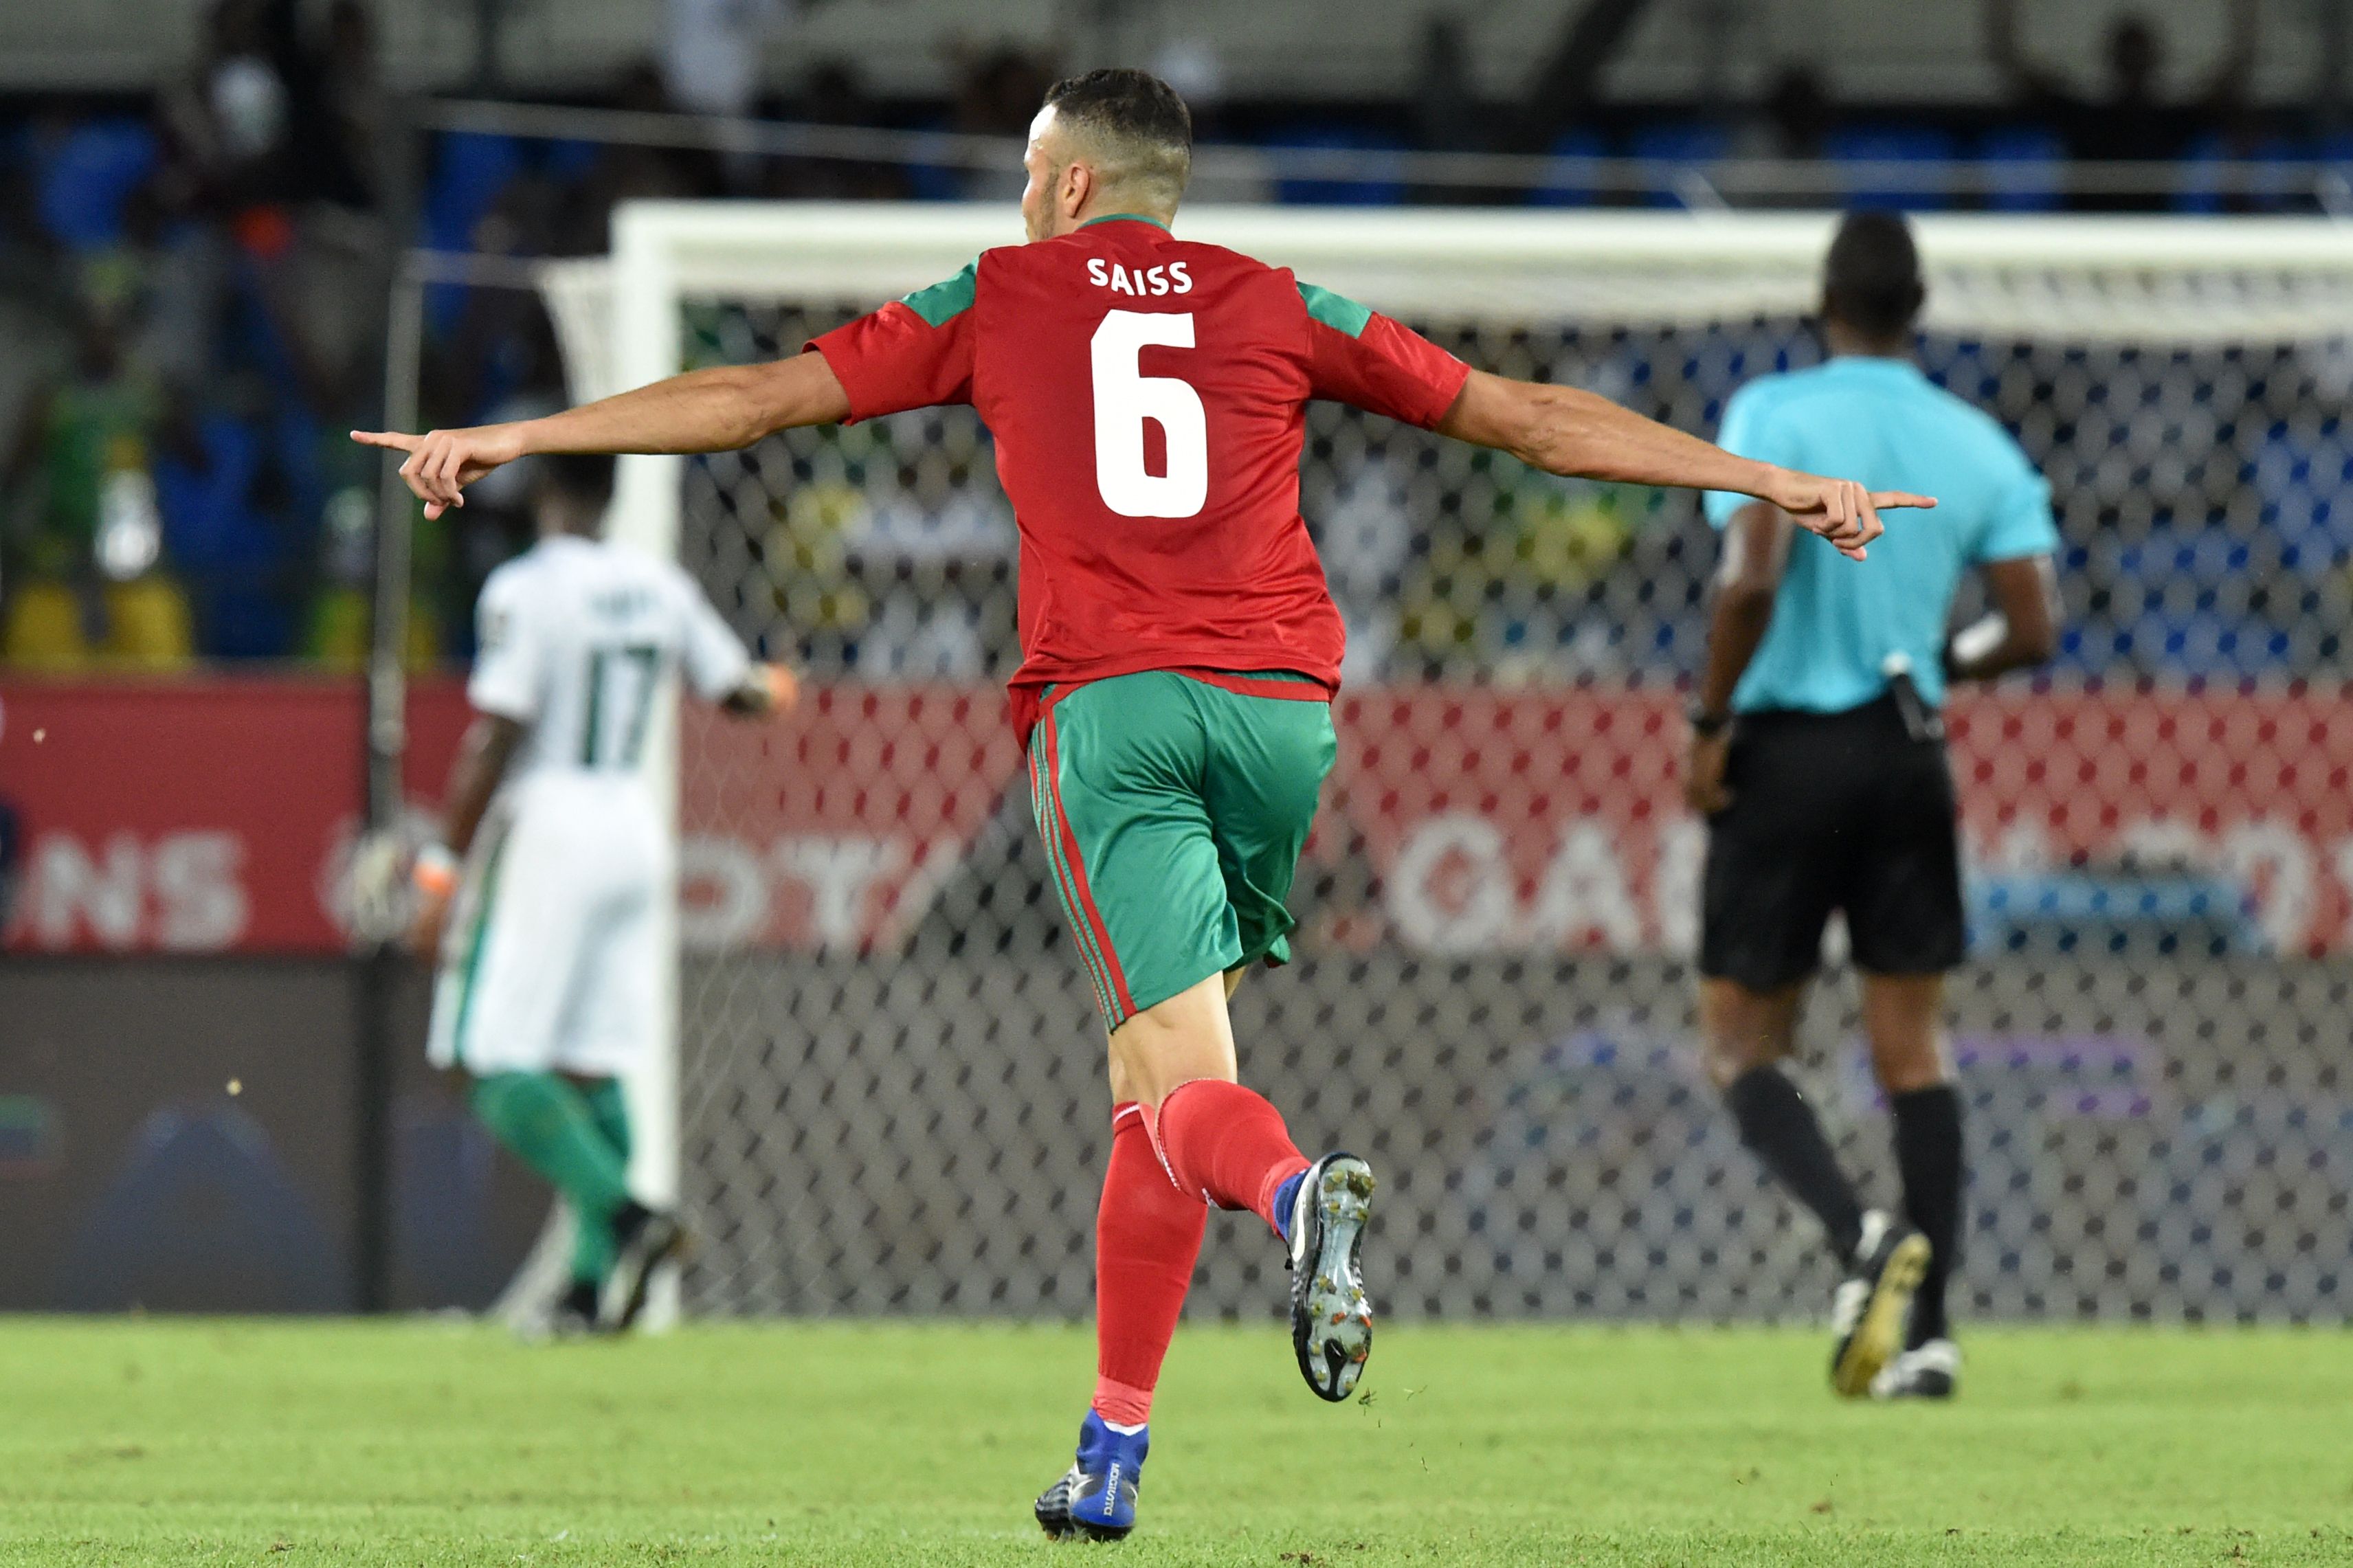 Morocco's midfielder Romain Saiss celebrates after his team scored a goal during the 2017 Africa Cup of Nations group C football match between Morocco and Ivory Coast in Oyem on January 24, 2017. / AFP / ISSOUF SANOGO        (Photo credit should read ISSOUF SANOGO/AFP/Getty Images)